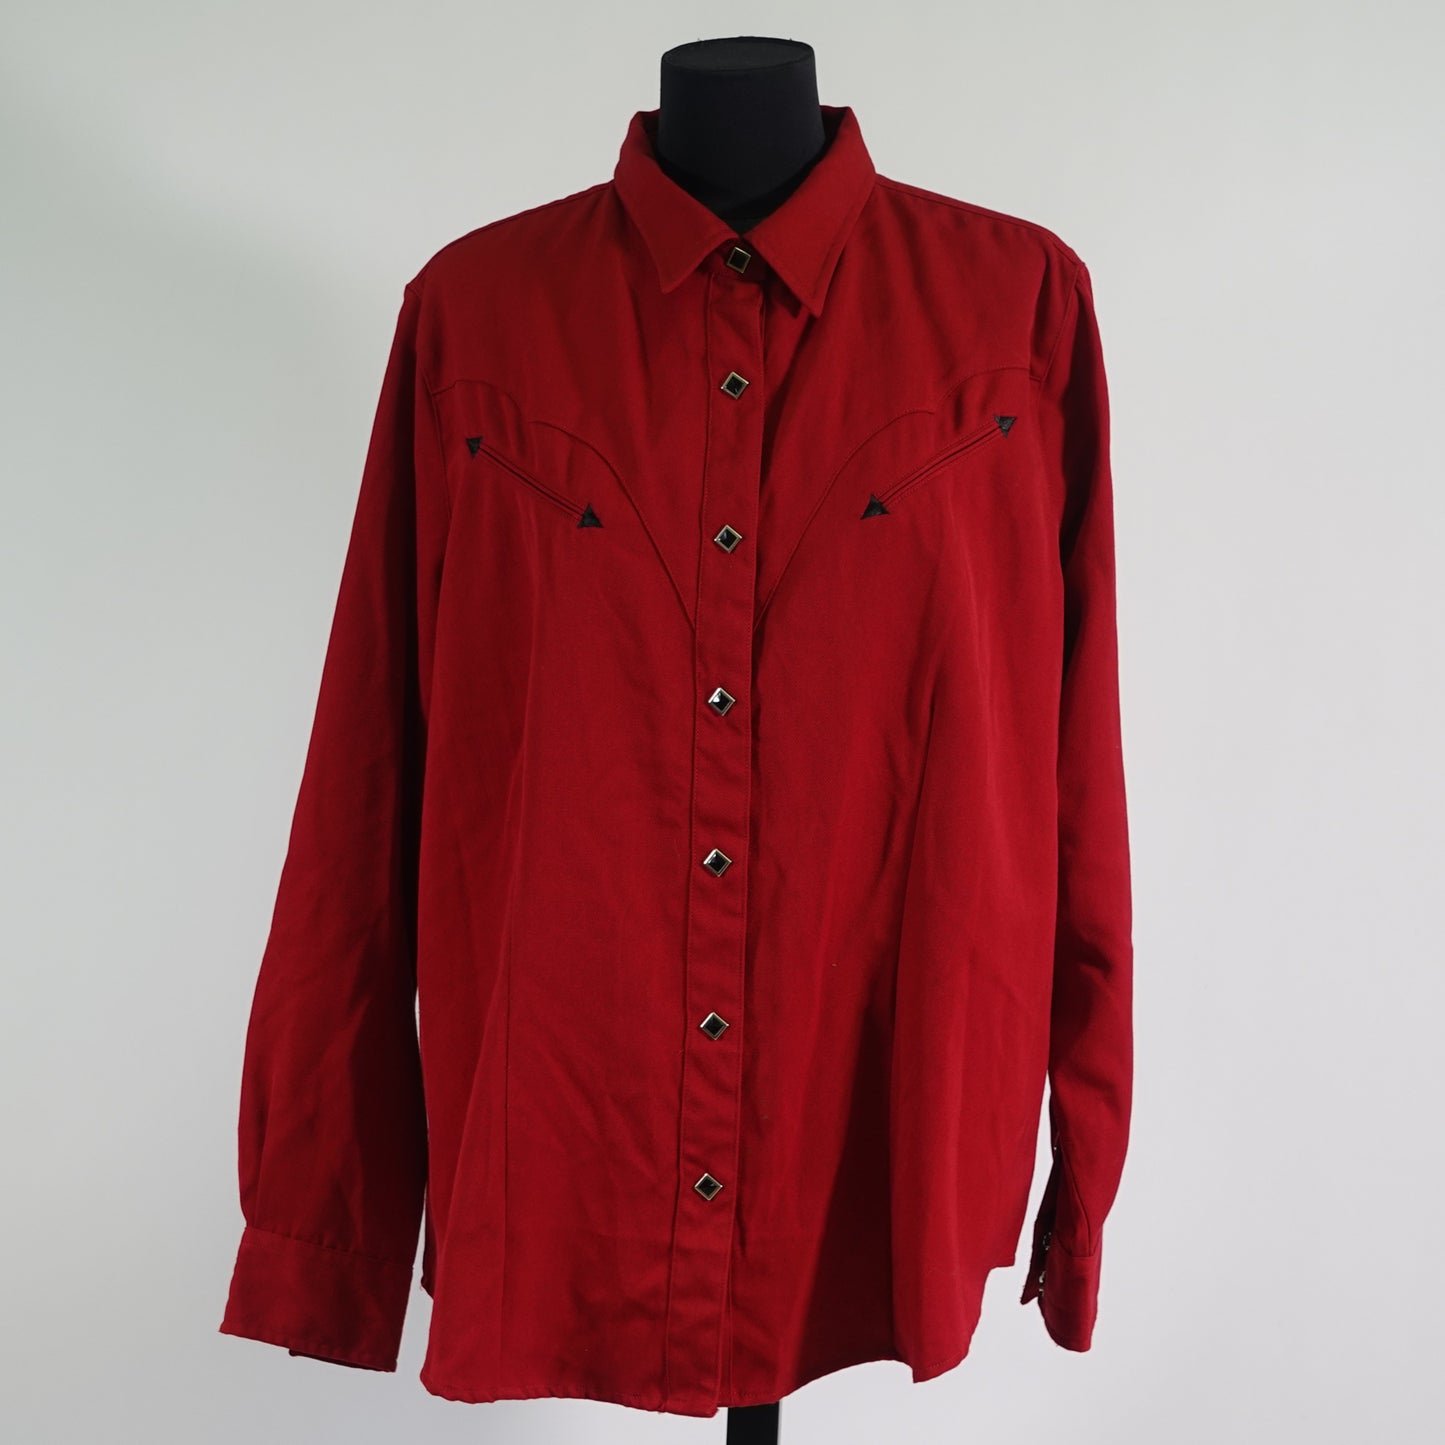 Vintage Red Western Button Up Top